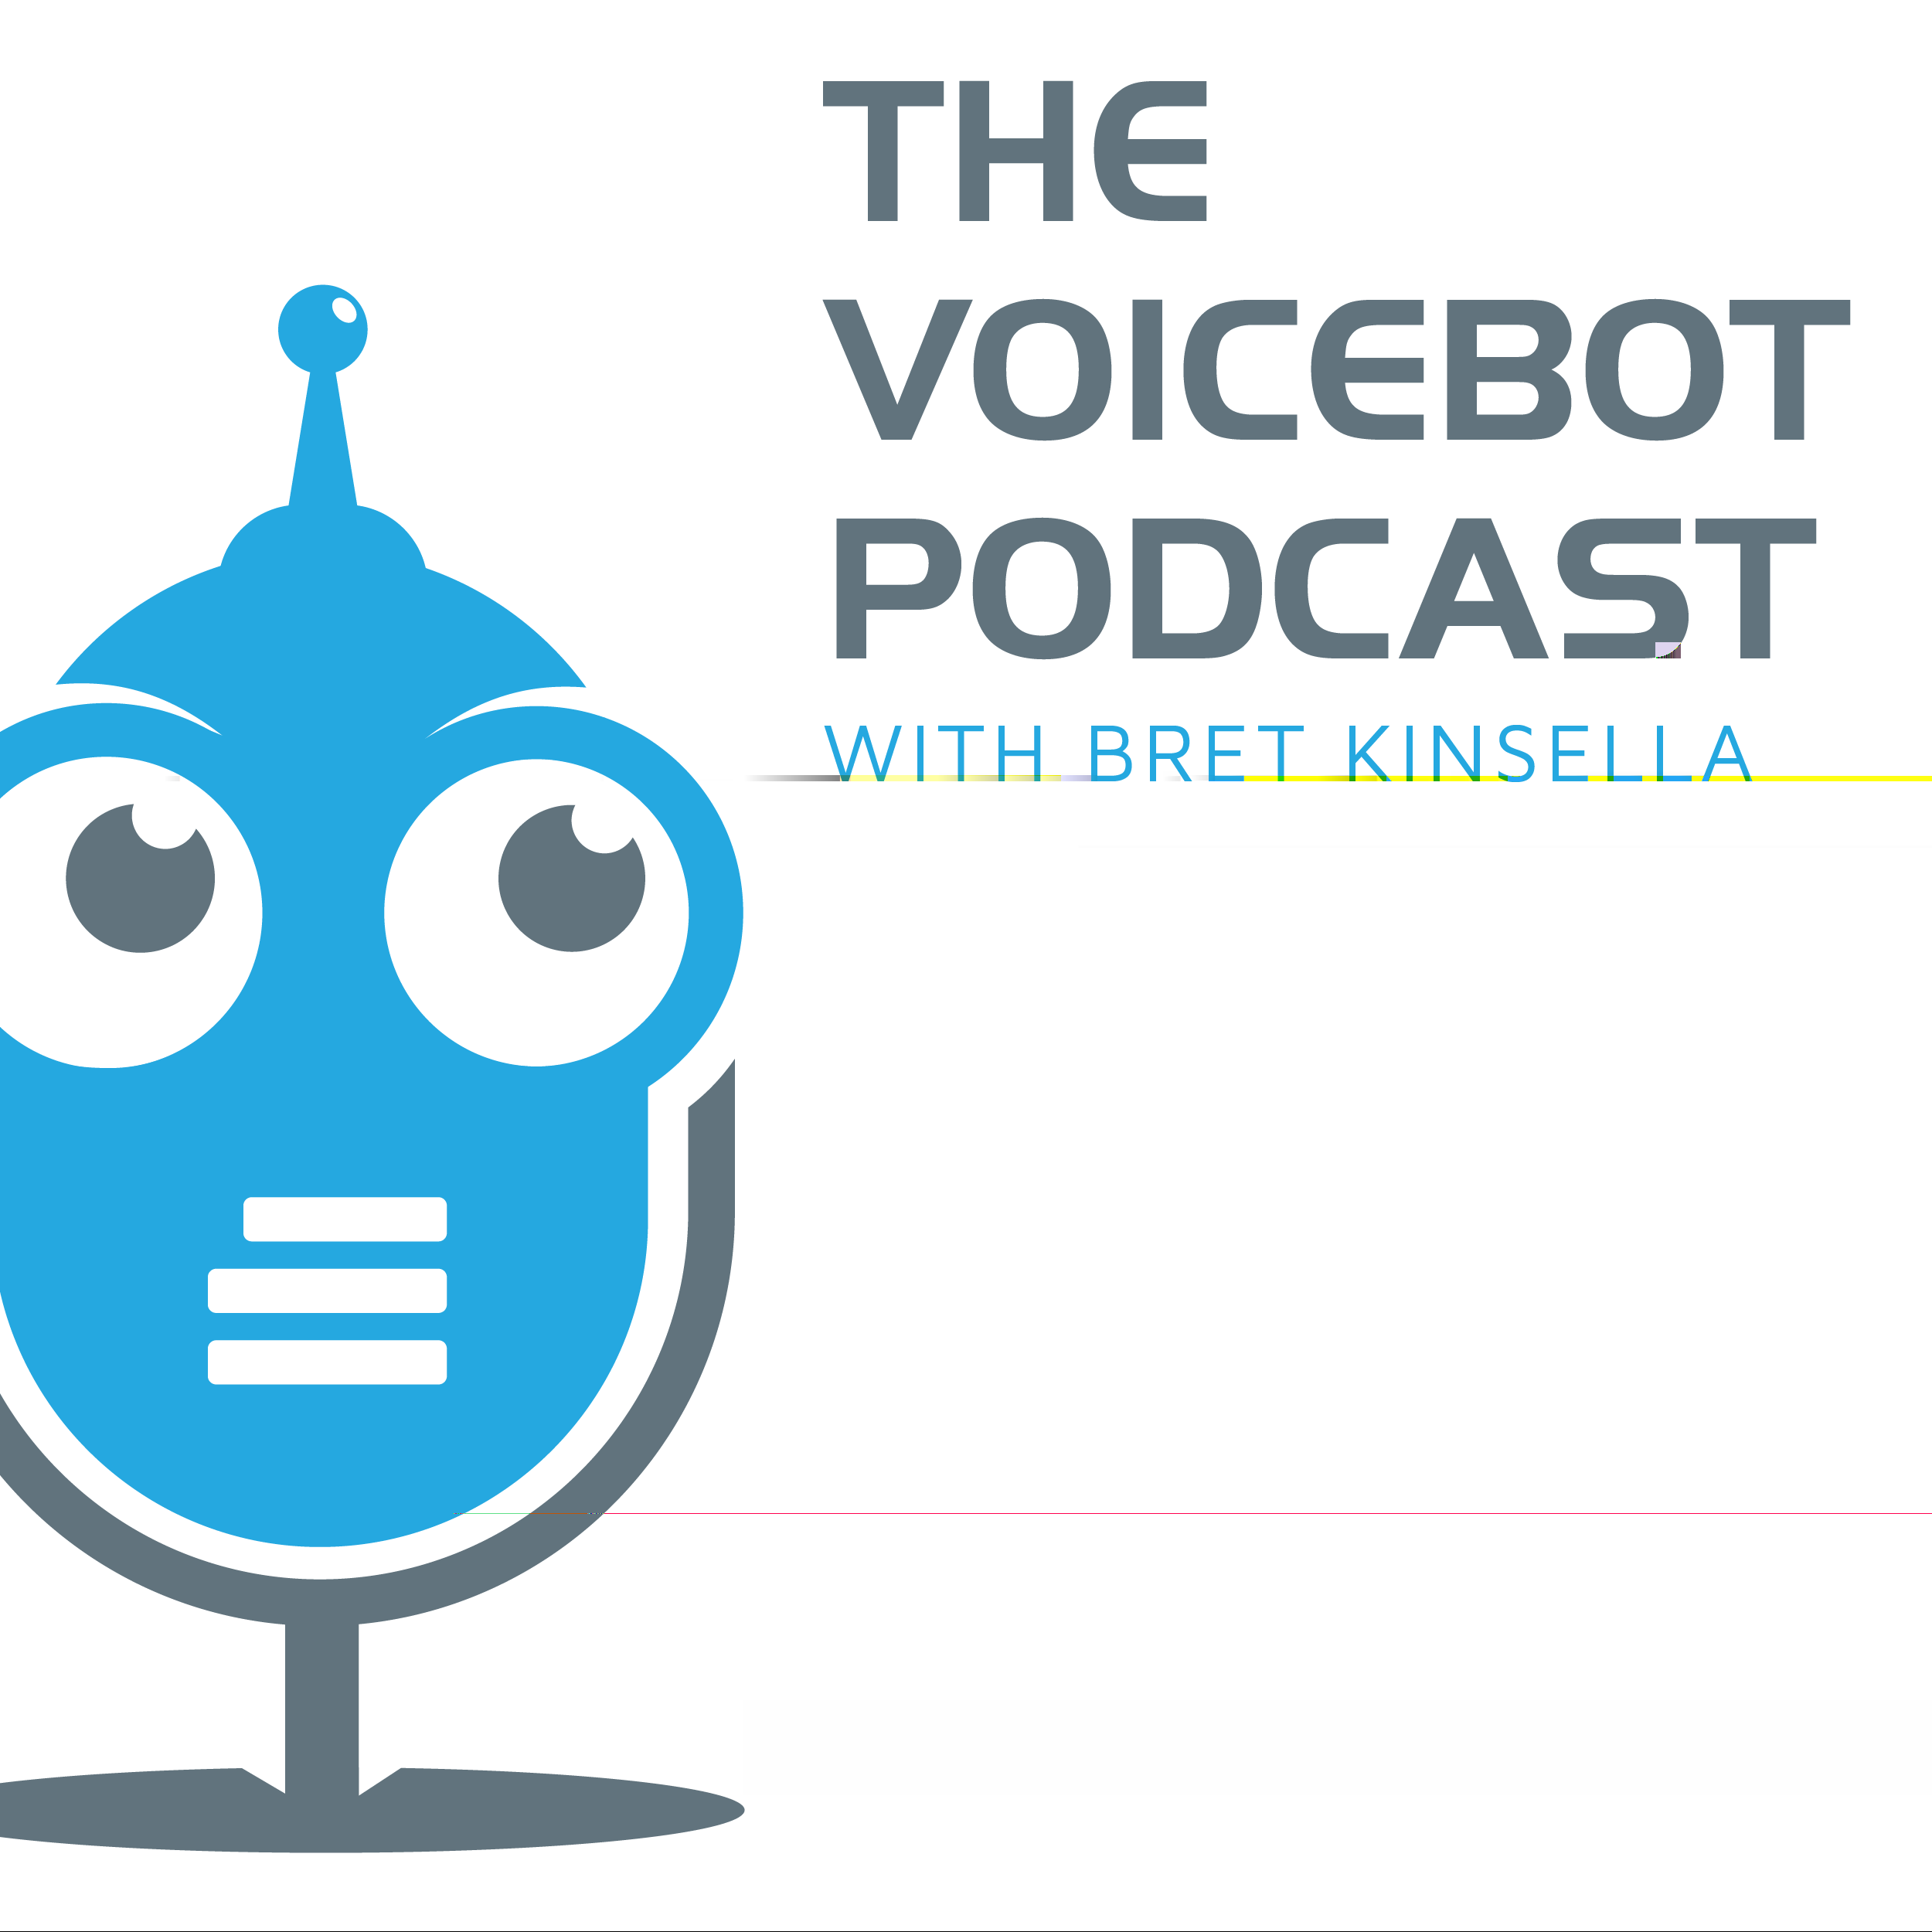 A highlight from Robert Scoble on Apple, Siri, ChatGPT, Virtual Companions, AR/VR, and a Lifetime in Silicon Valley - Voicebot Podcast Ep 327